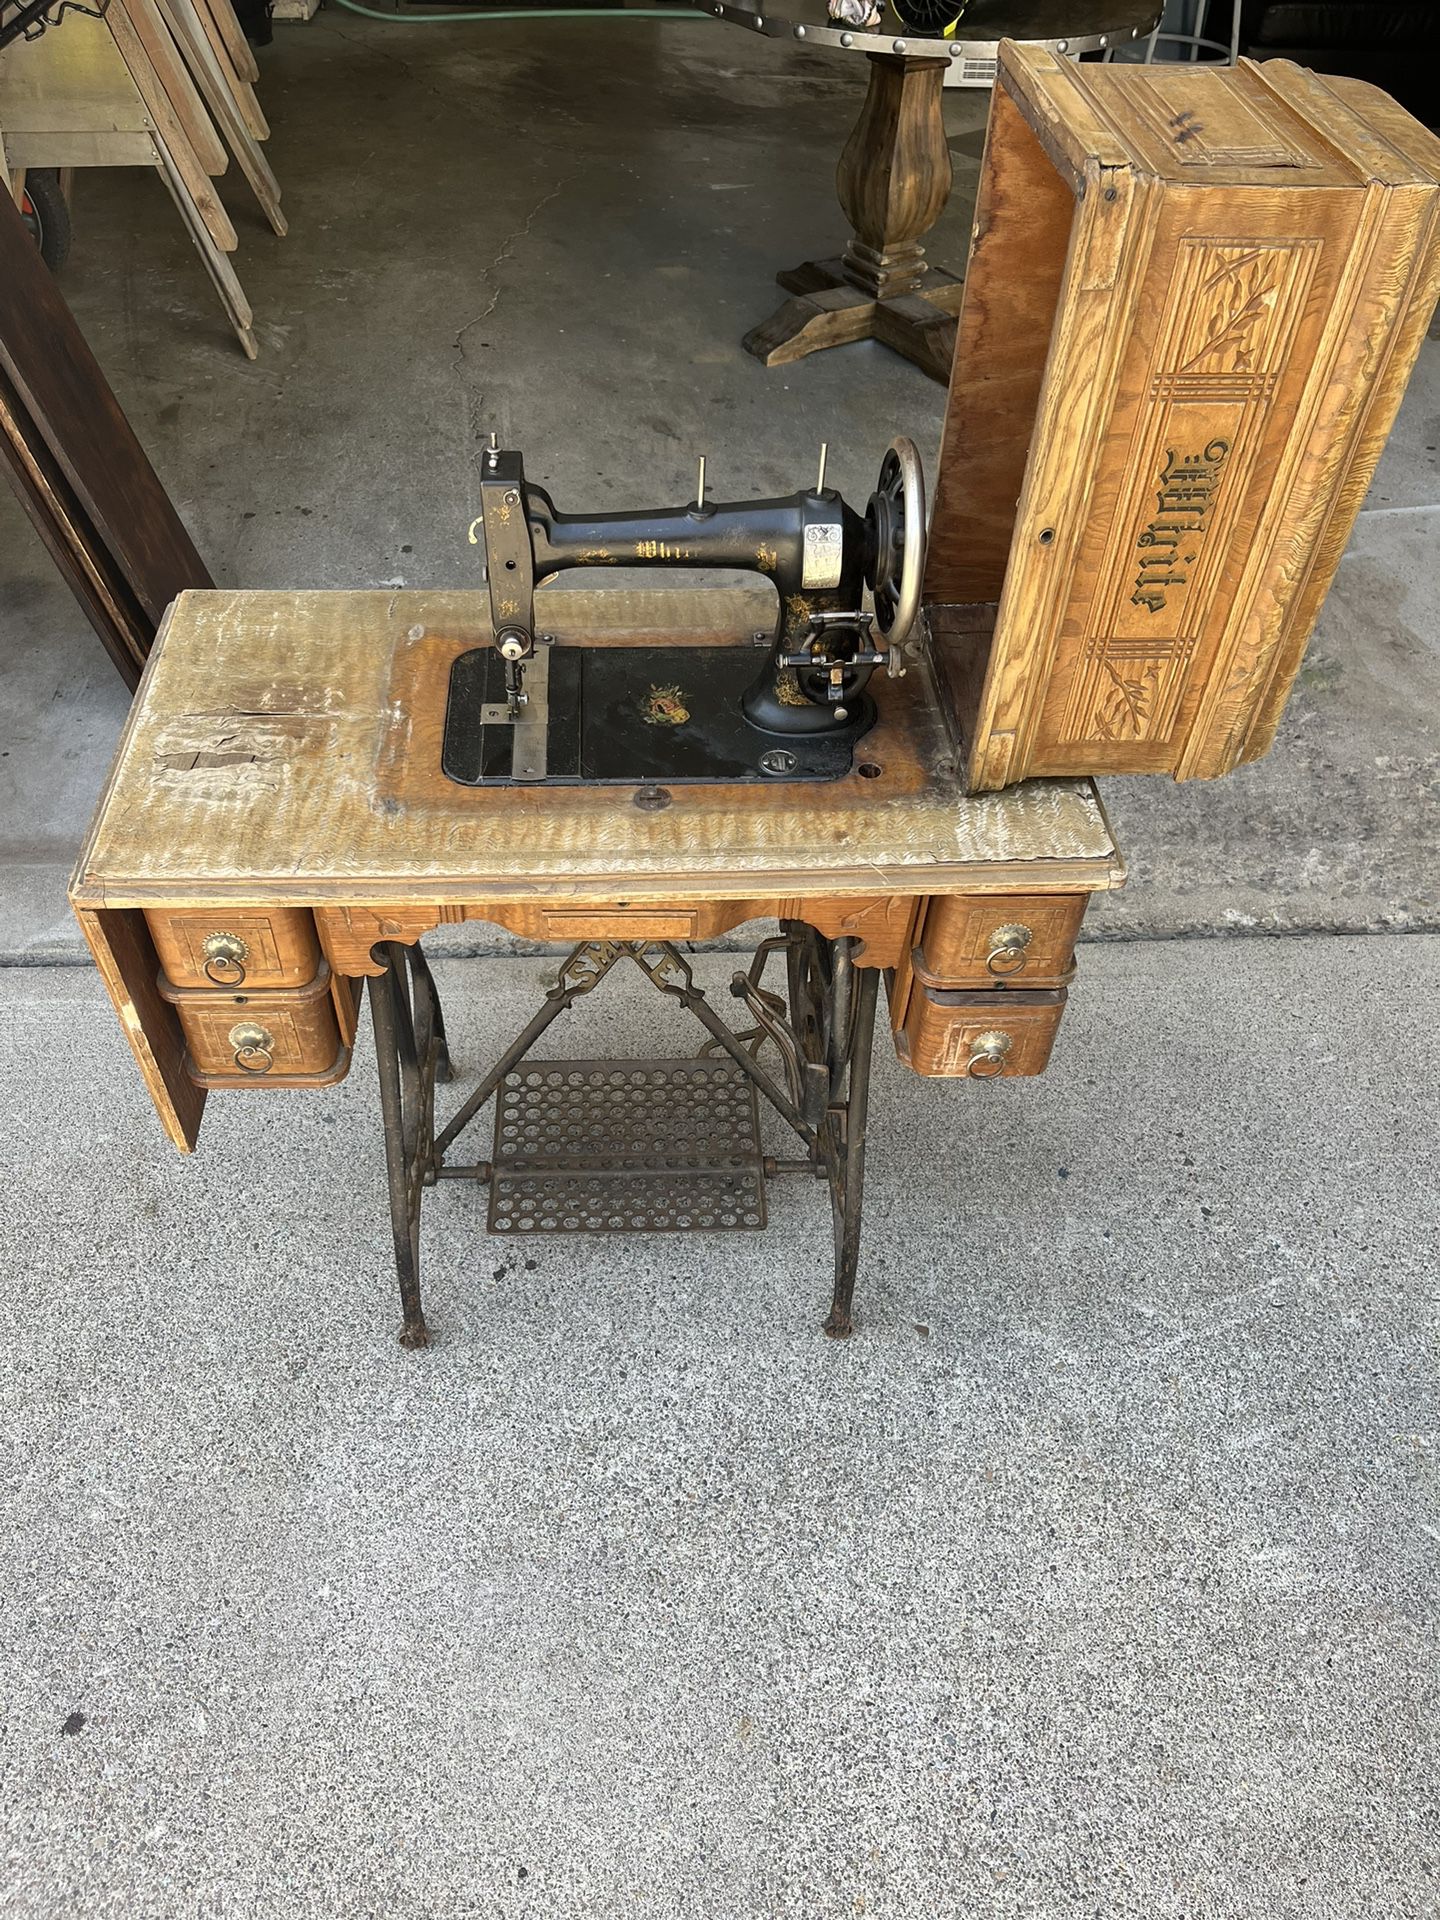 Vintage 1876, Antique White Rotary pedal treadle sewing machine And Table.  Made in the USA. Brand is white. 